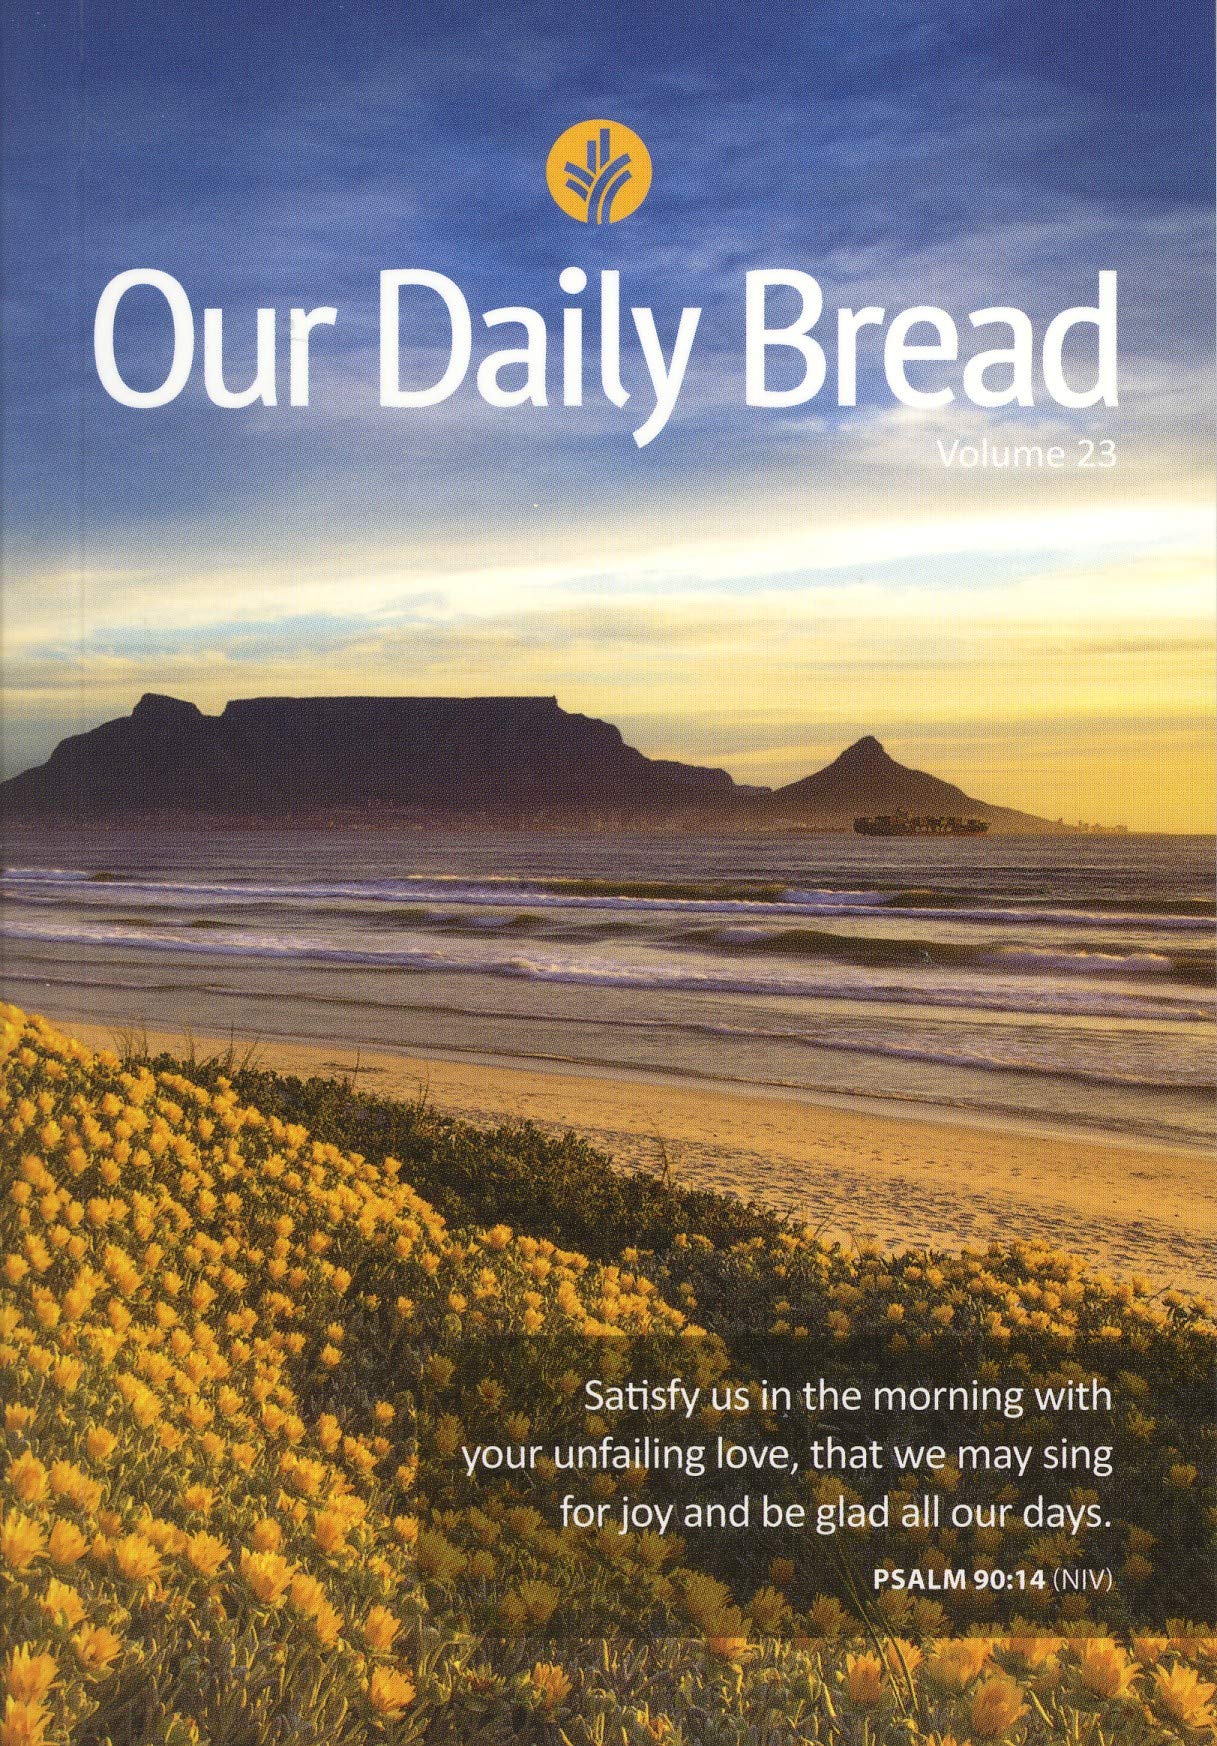 Our Daily Bread Annual Edition 2019 – Christian Book Discounters